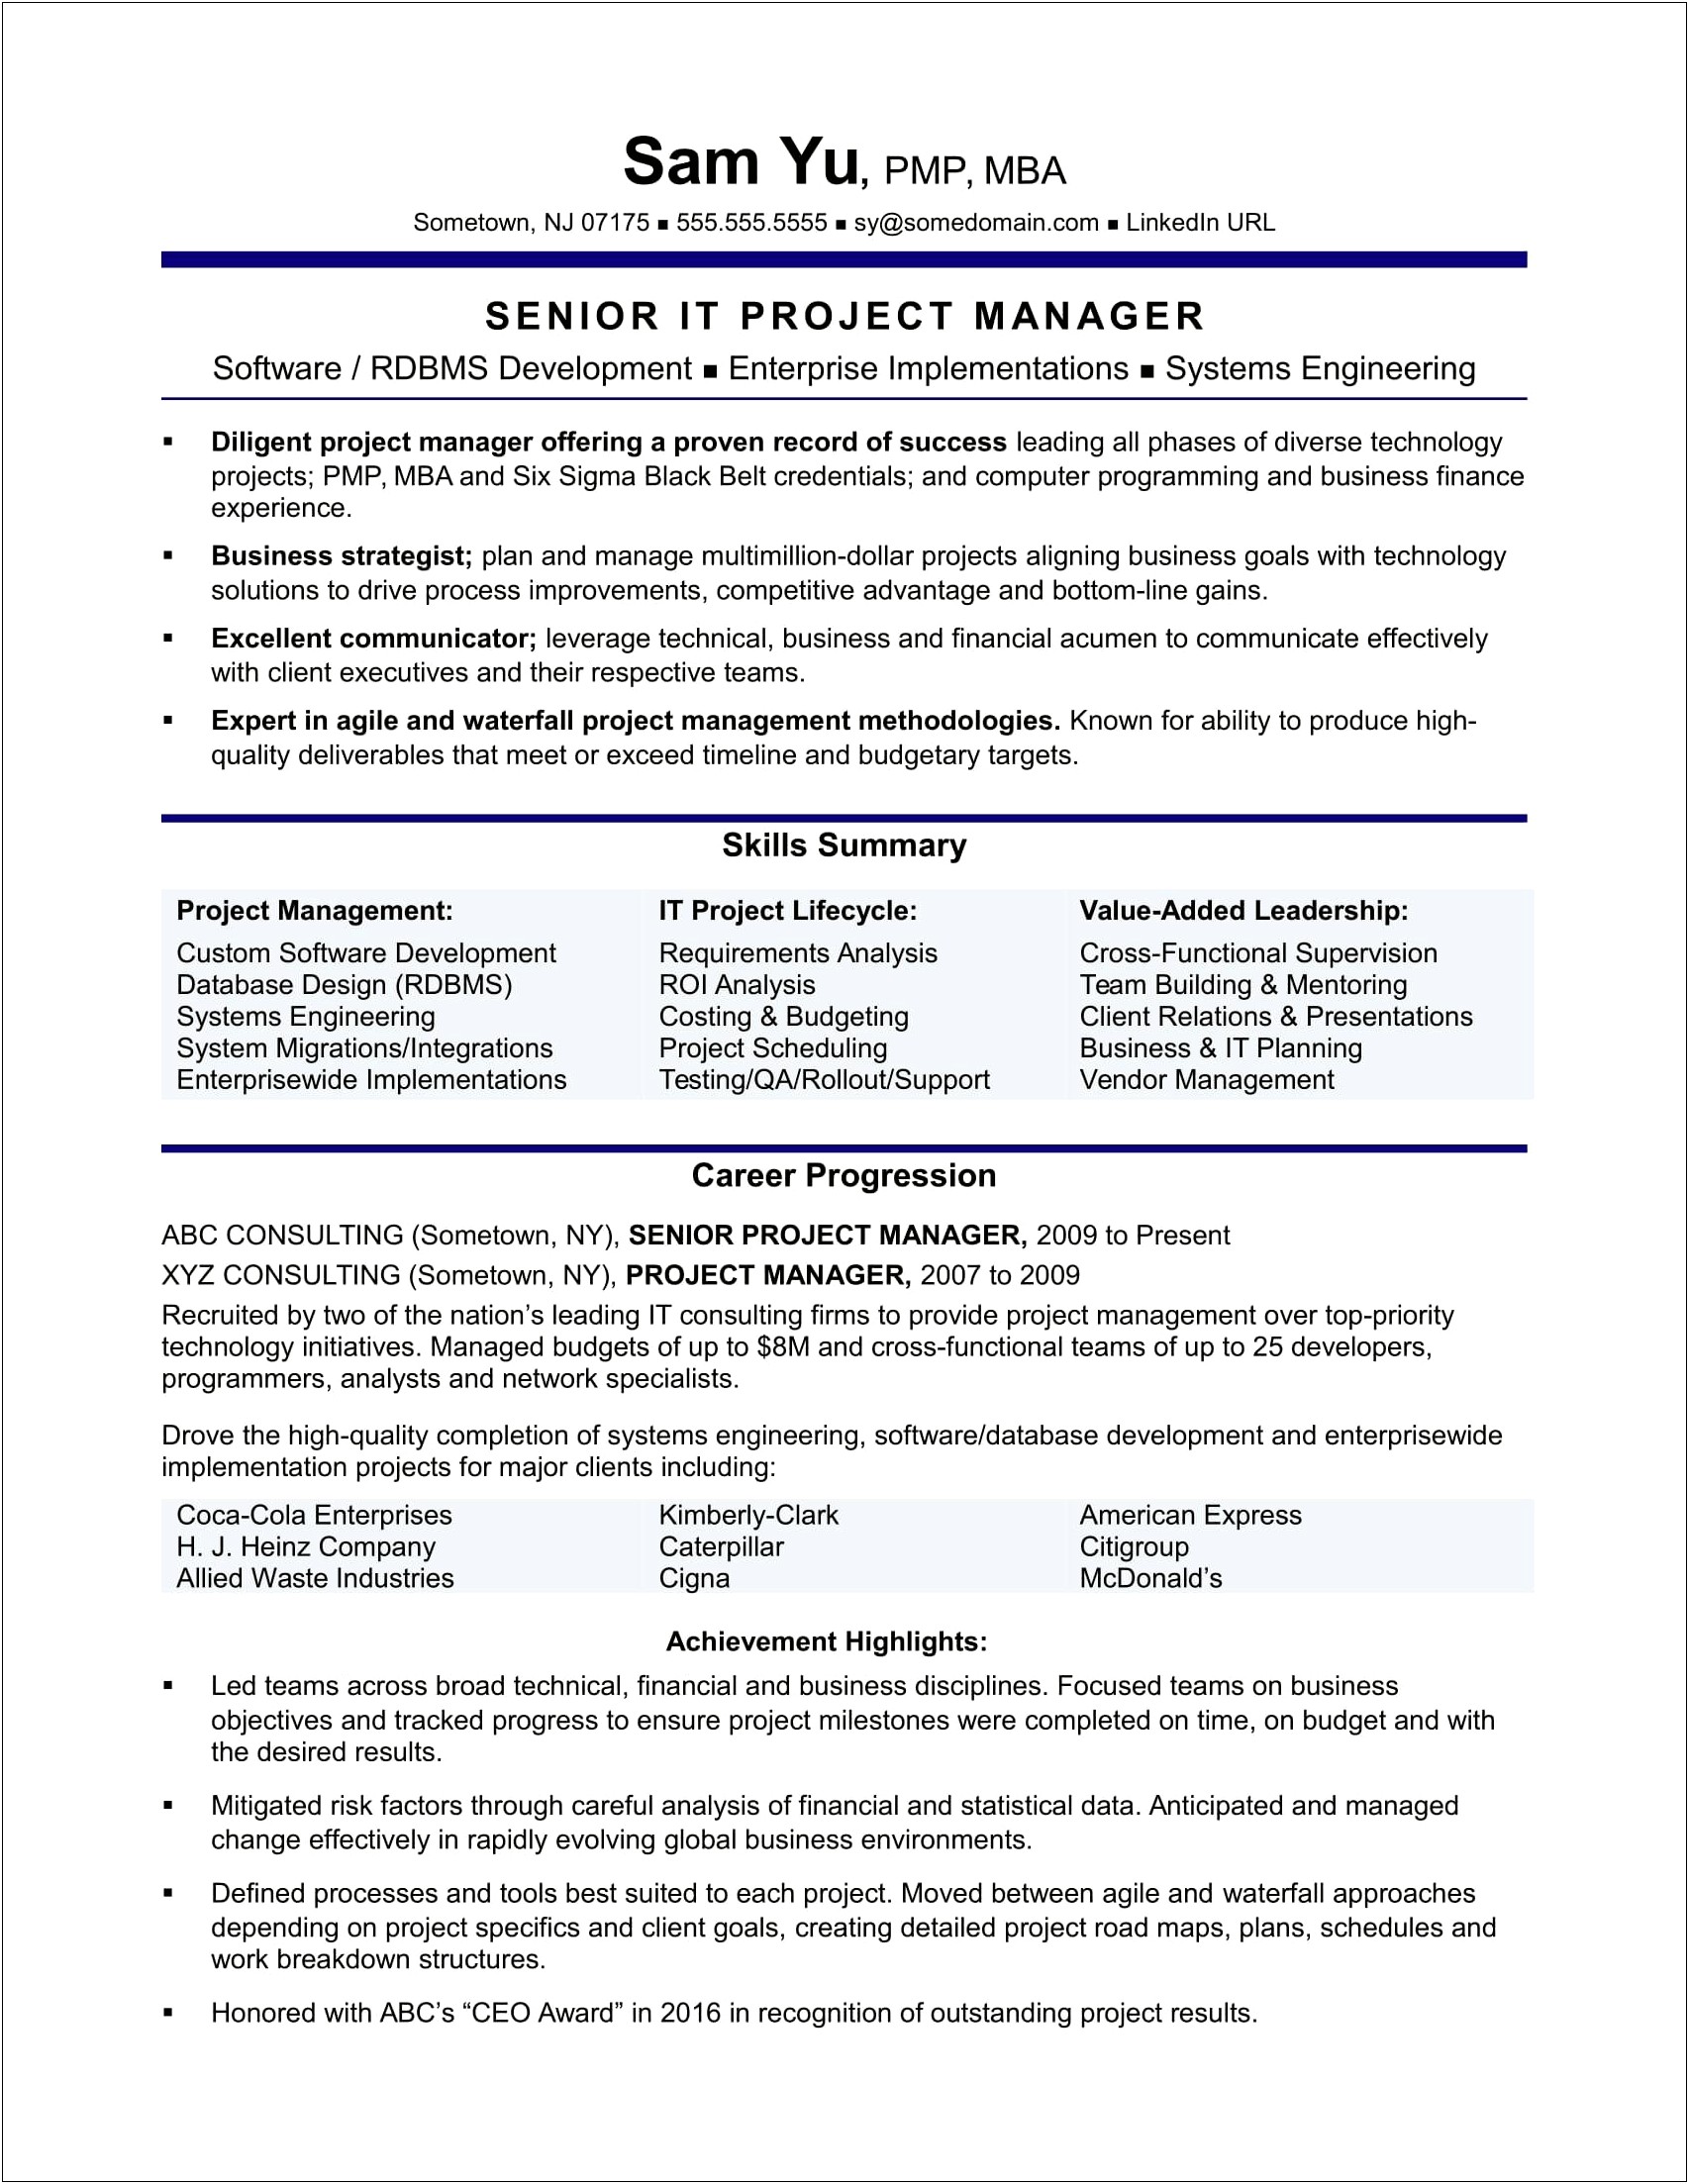 Skill Based Resume For Project Coordinator